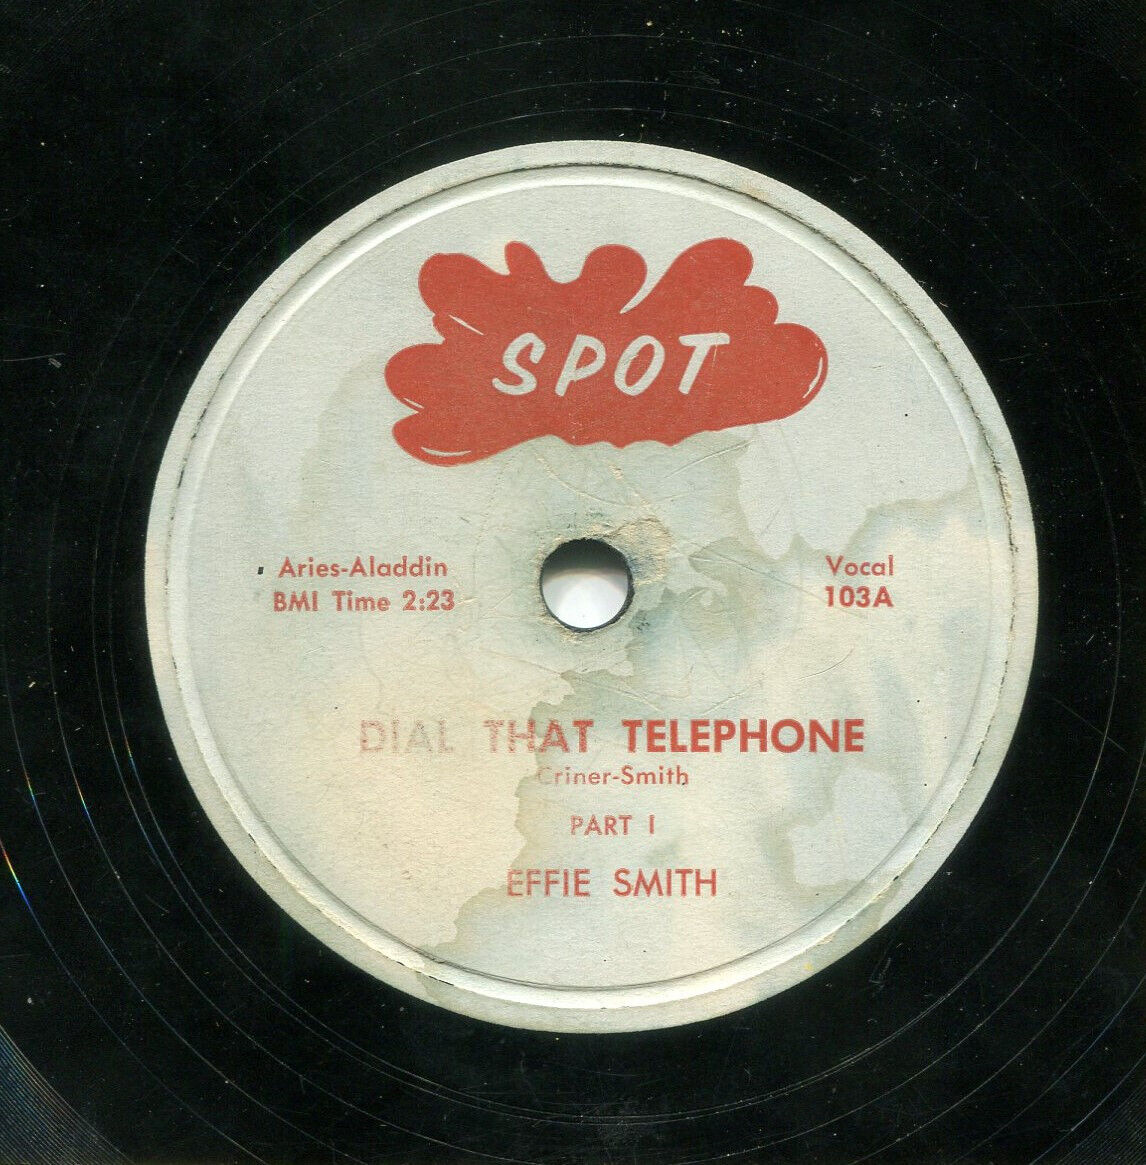 EFFIE SMITH (Dial That Telephone / Part 2 ) POP  78 RPM  RECORD